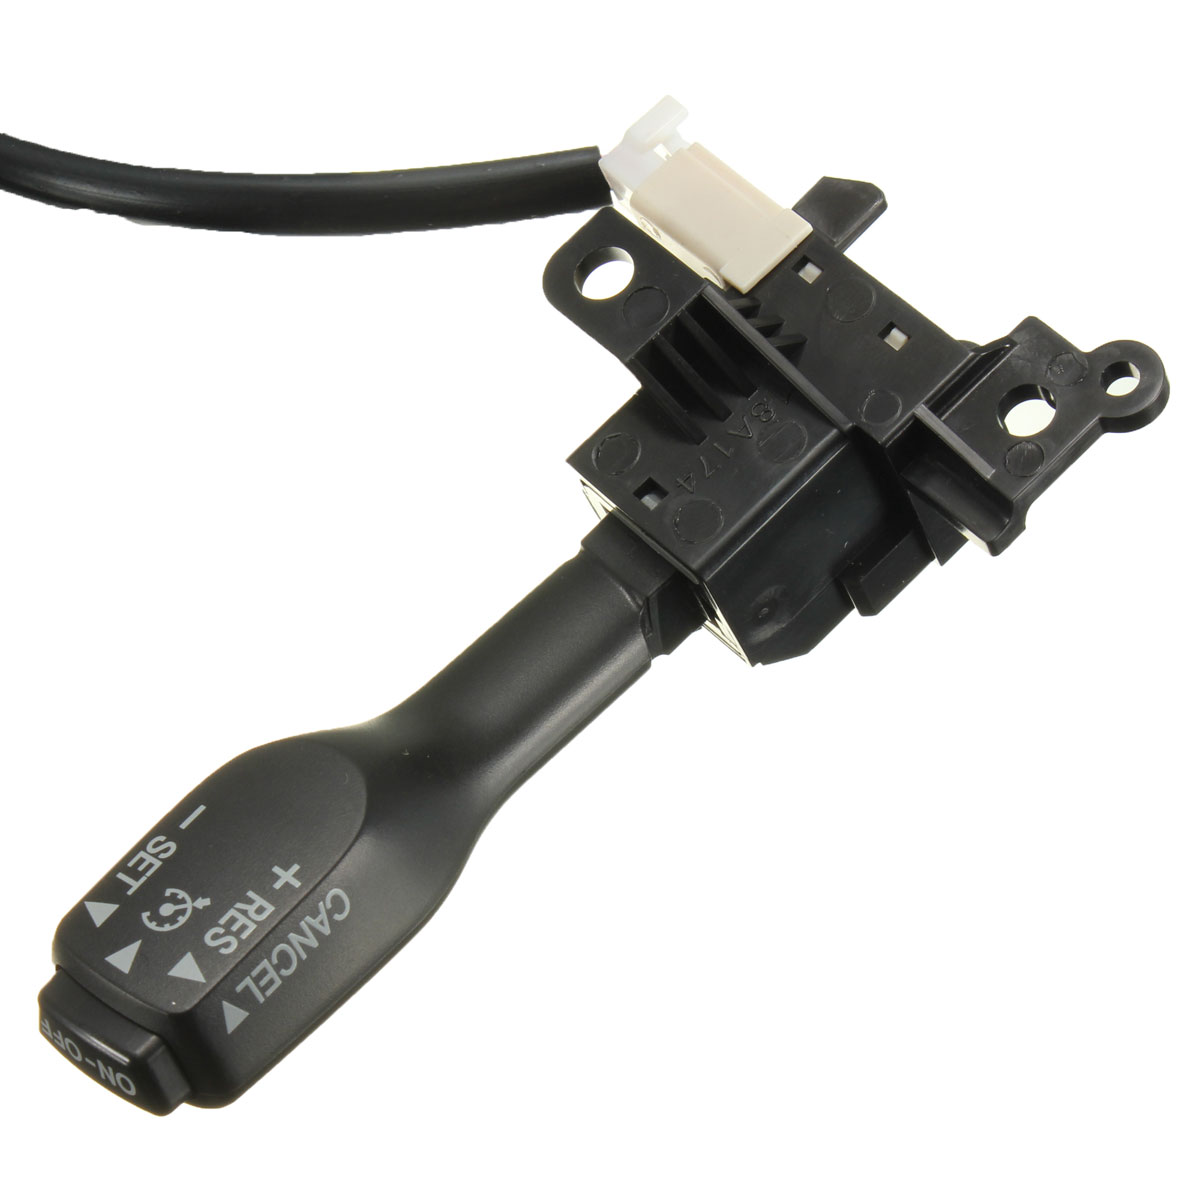 Turn signal switch replacement toyota corolla